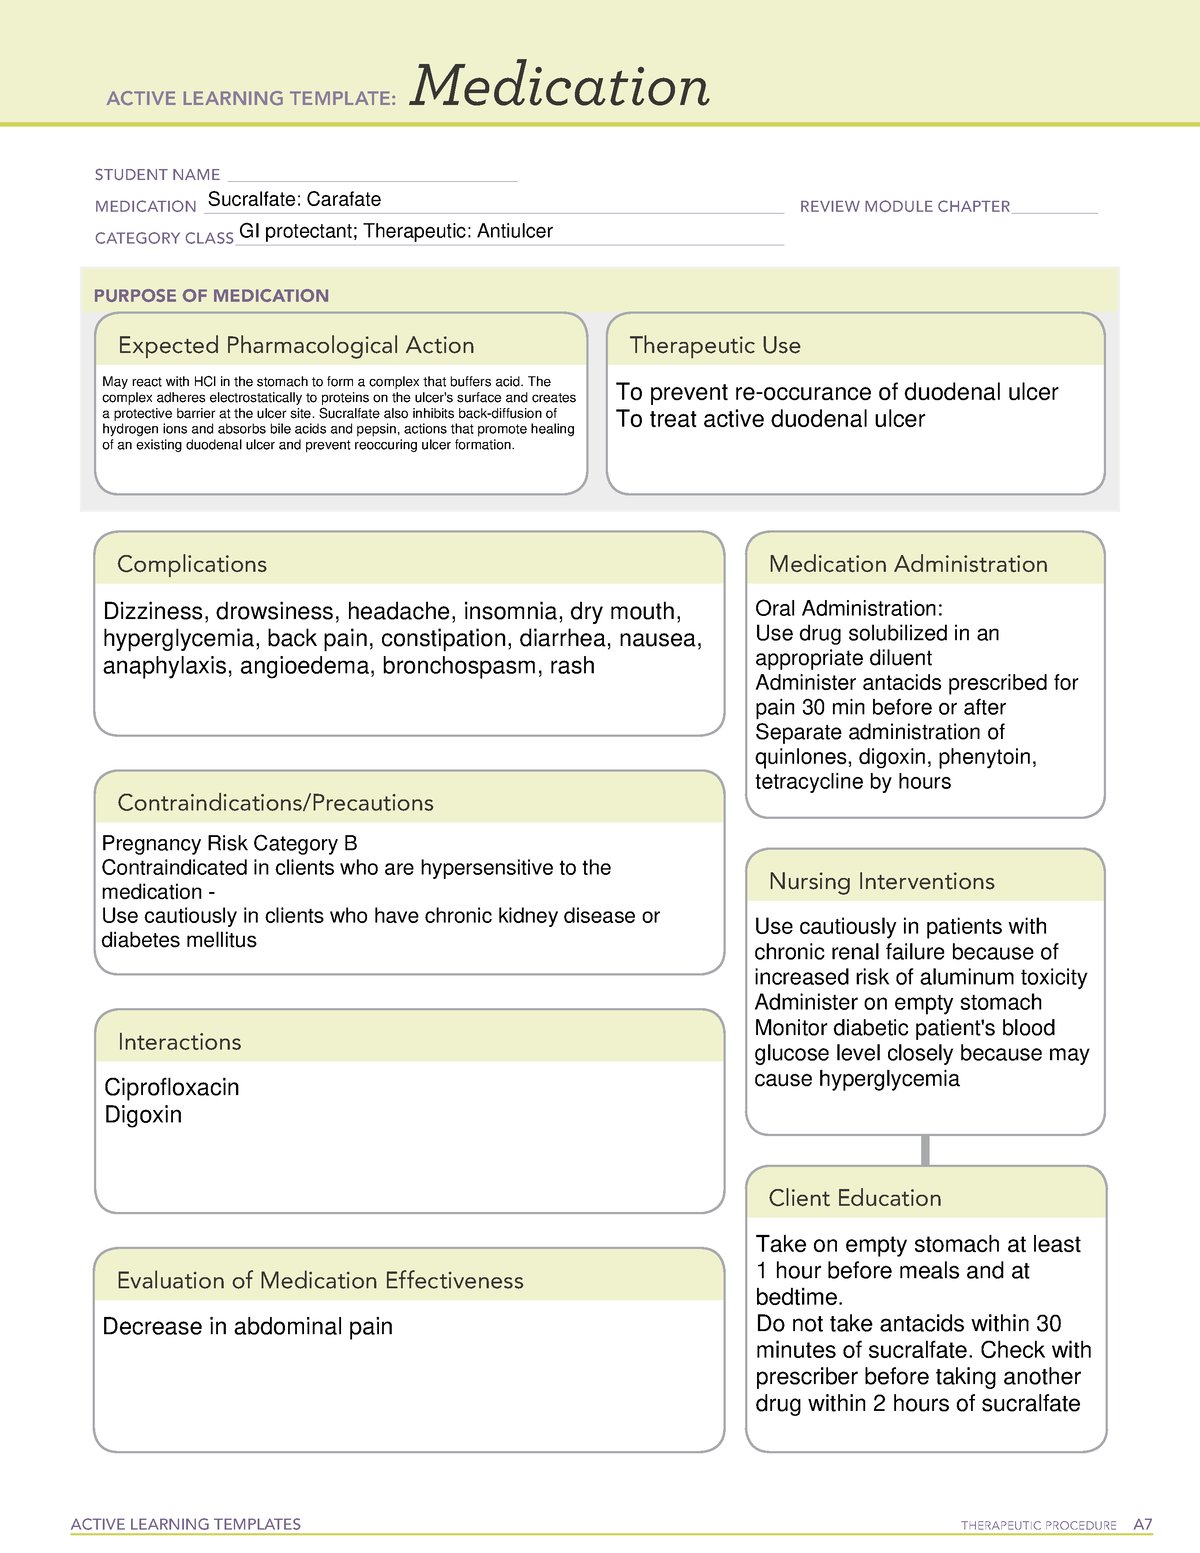 ati-sucralfate-medication-sheet-active-learning-templates-therapeutic-procedure-a-medication